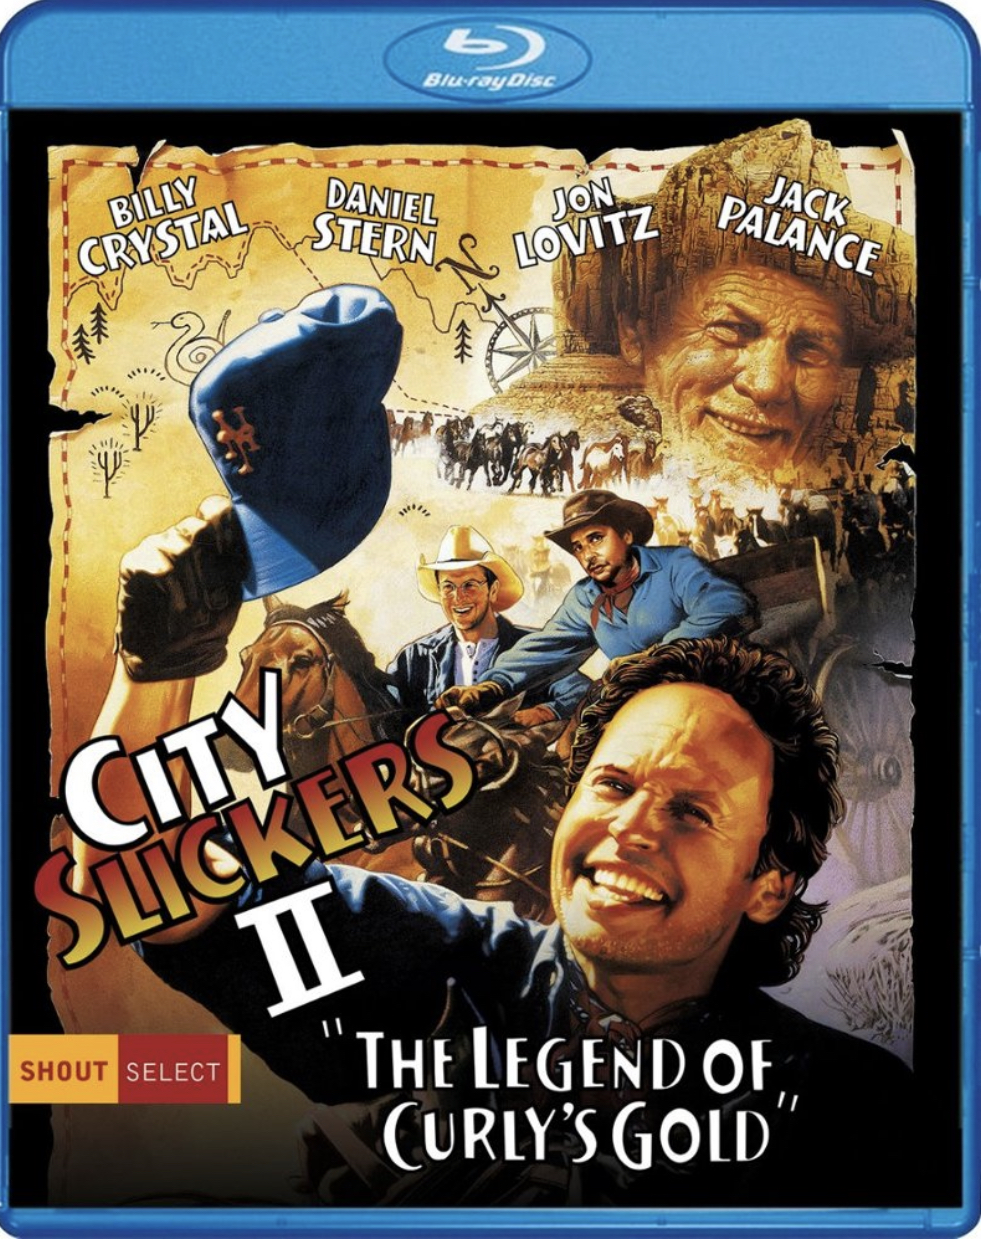 City Slickers II: The Legend of Curly's Gold [Blu-ray] [1994] $19.99 pre-order - $19.99